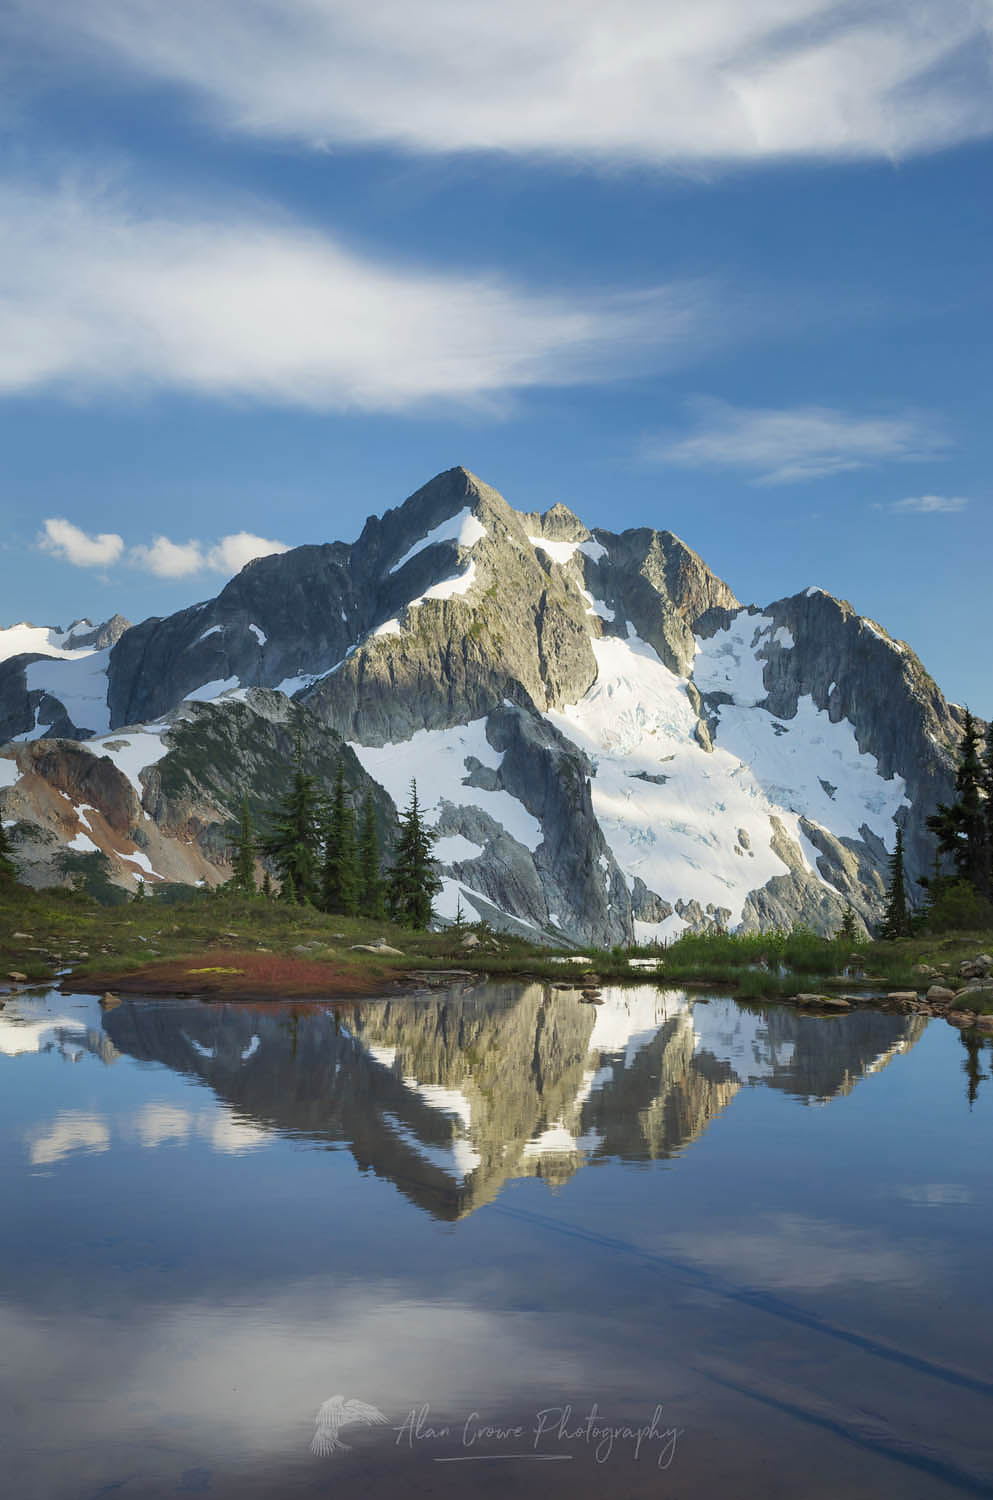 Whatcom Peak reflected in Tapto Lake, North Cascades National Park #61465